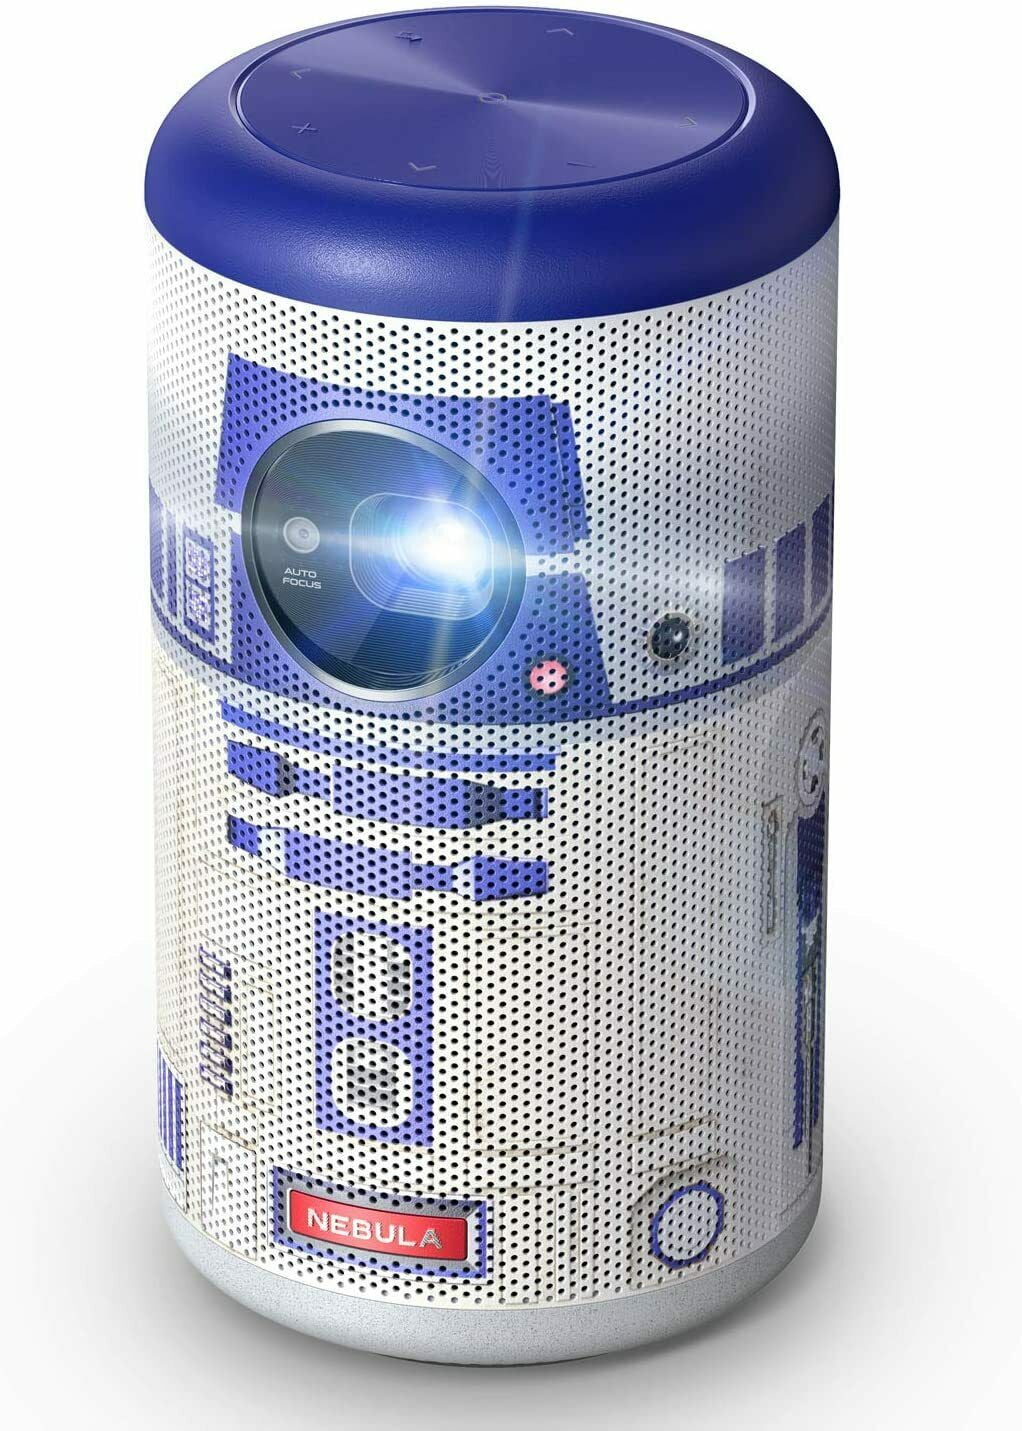 Anker Nebula Capsule II Star Wars R2-D2 Limited Edition Smart Mini  Projector, 200 ANSI Lumen 720p DLP HD Portable Projector, Android TV 9.0,  8W 